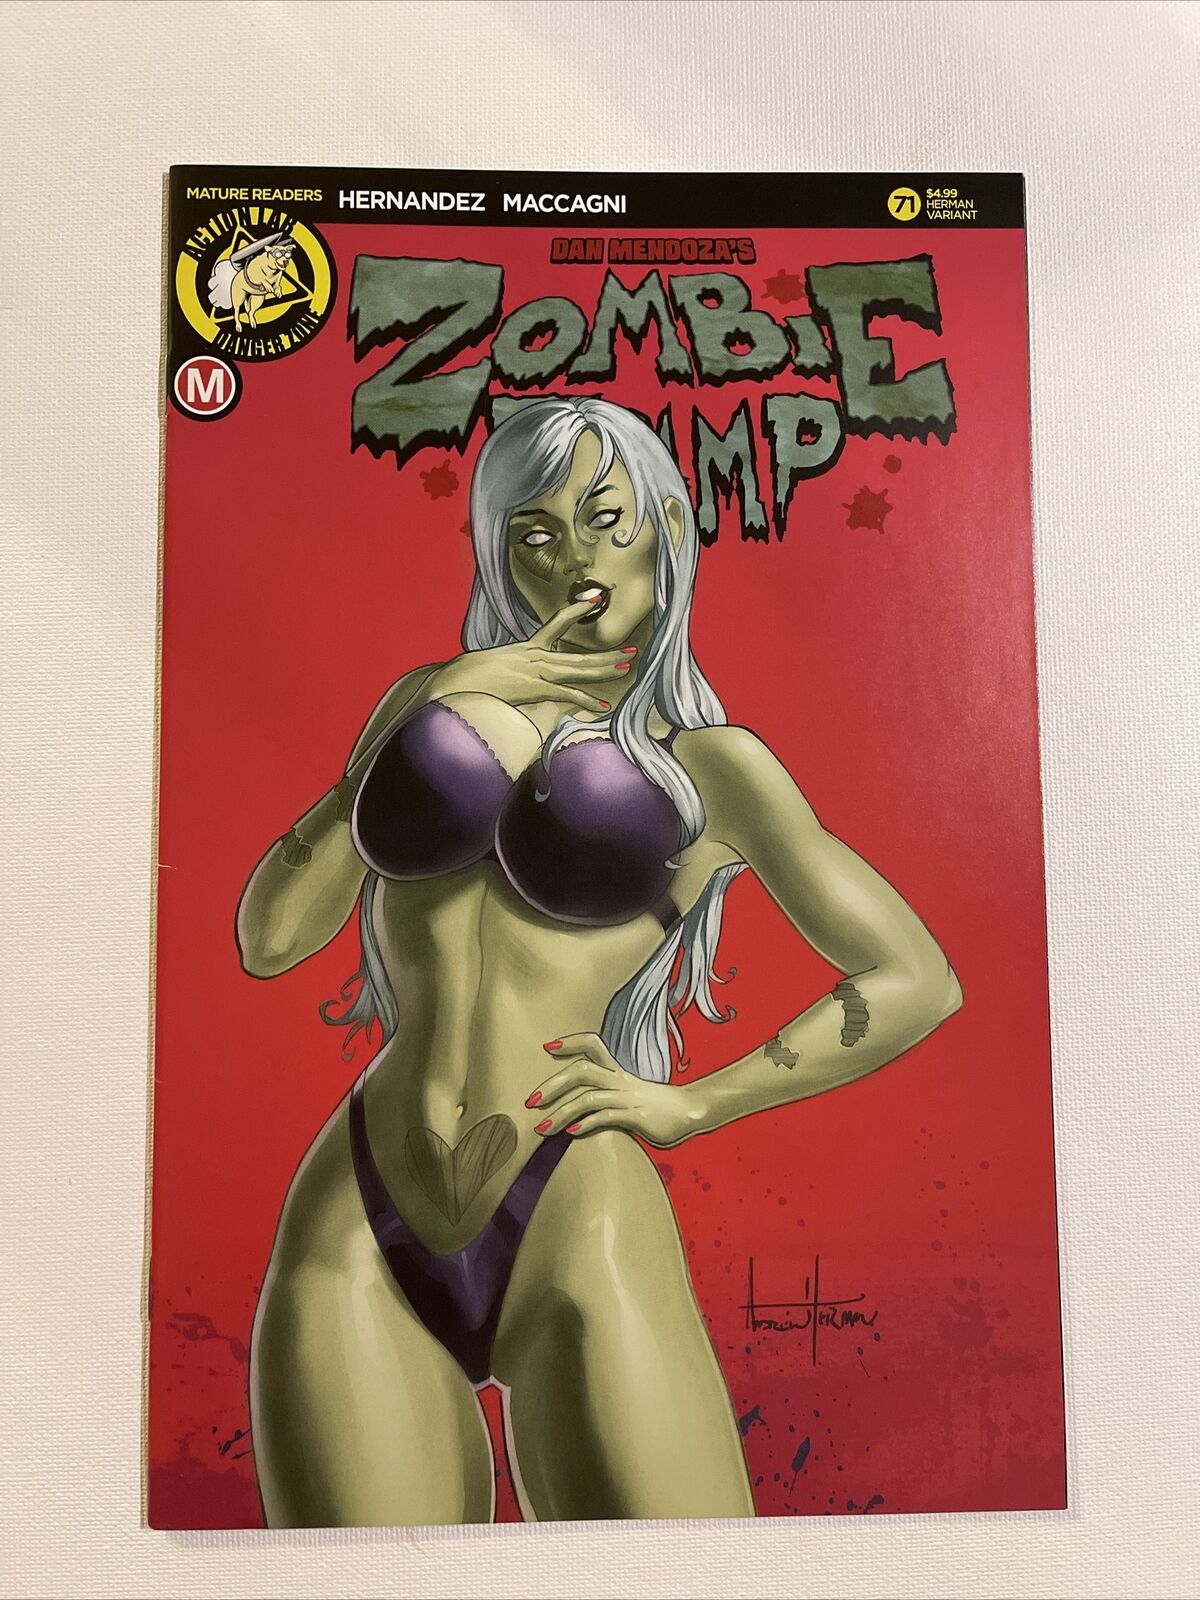 ZOMBIE TRAMP ONGOING #71 CVR E HERMAN (MR) ACTION LAB ENTERTAINMENT